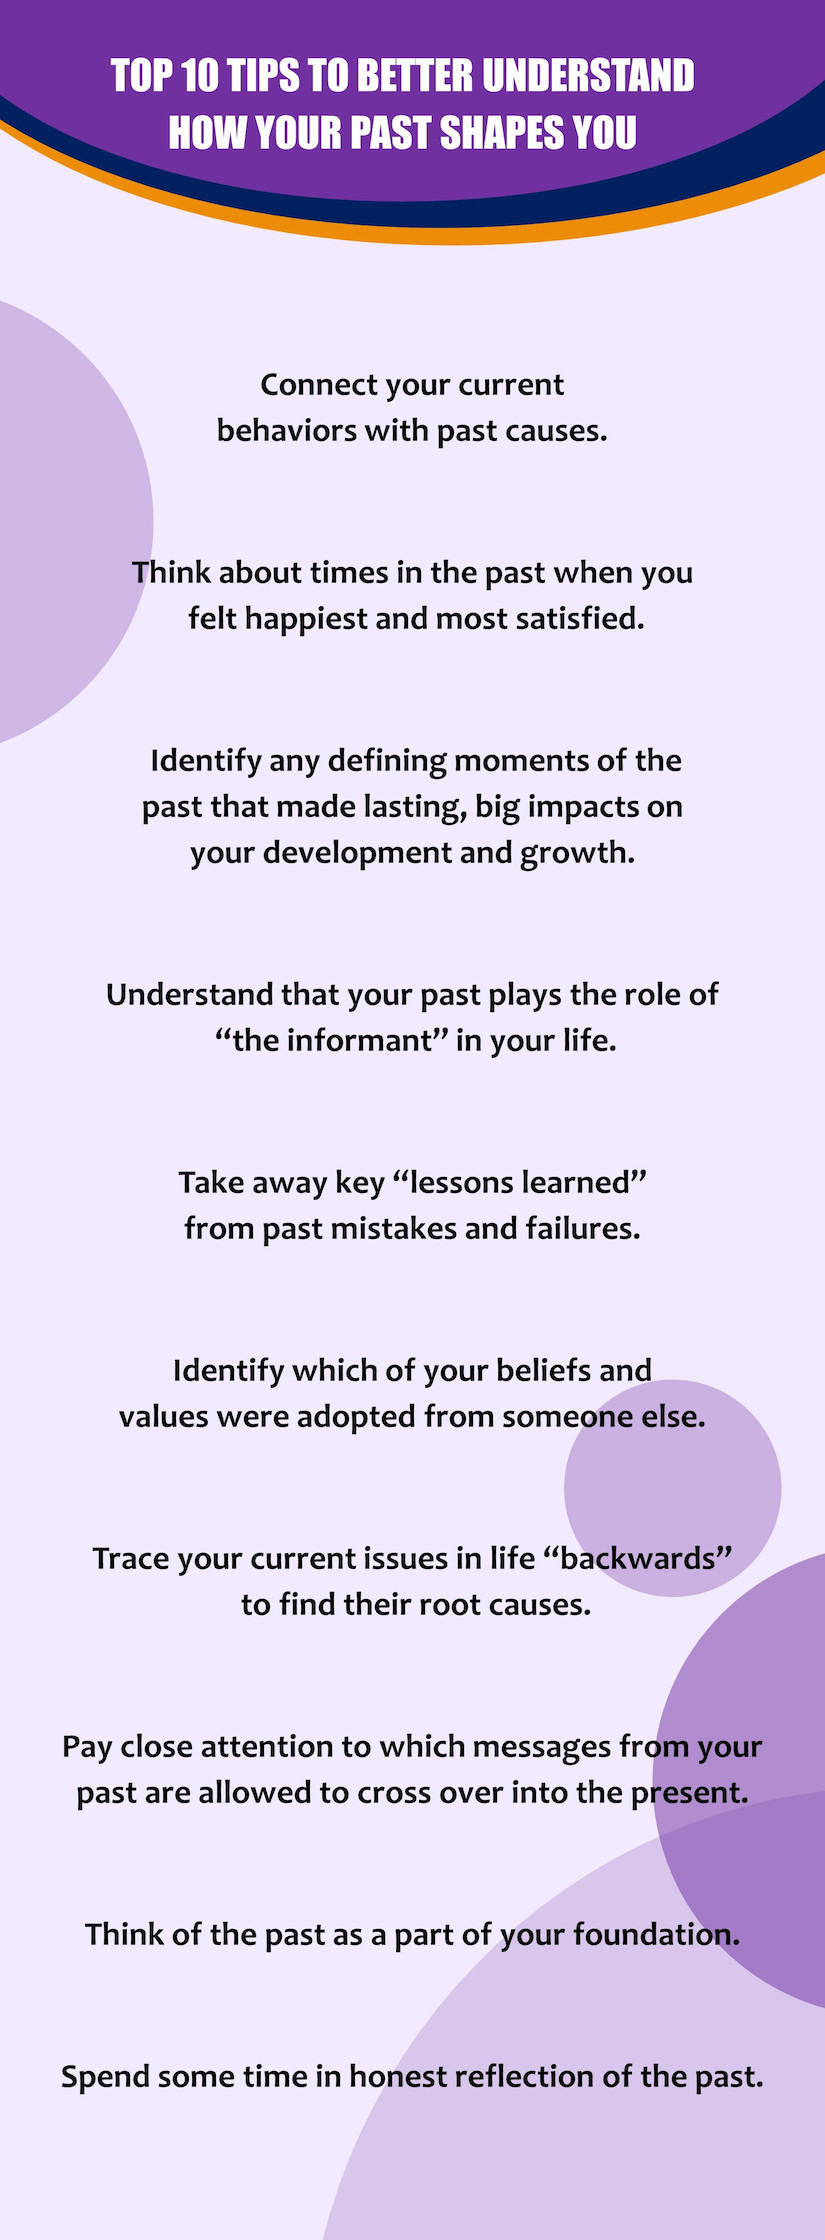 Top 10 Tips To Better Understand How Your Past Shapes You